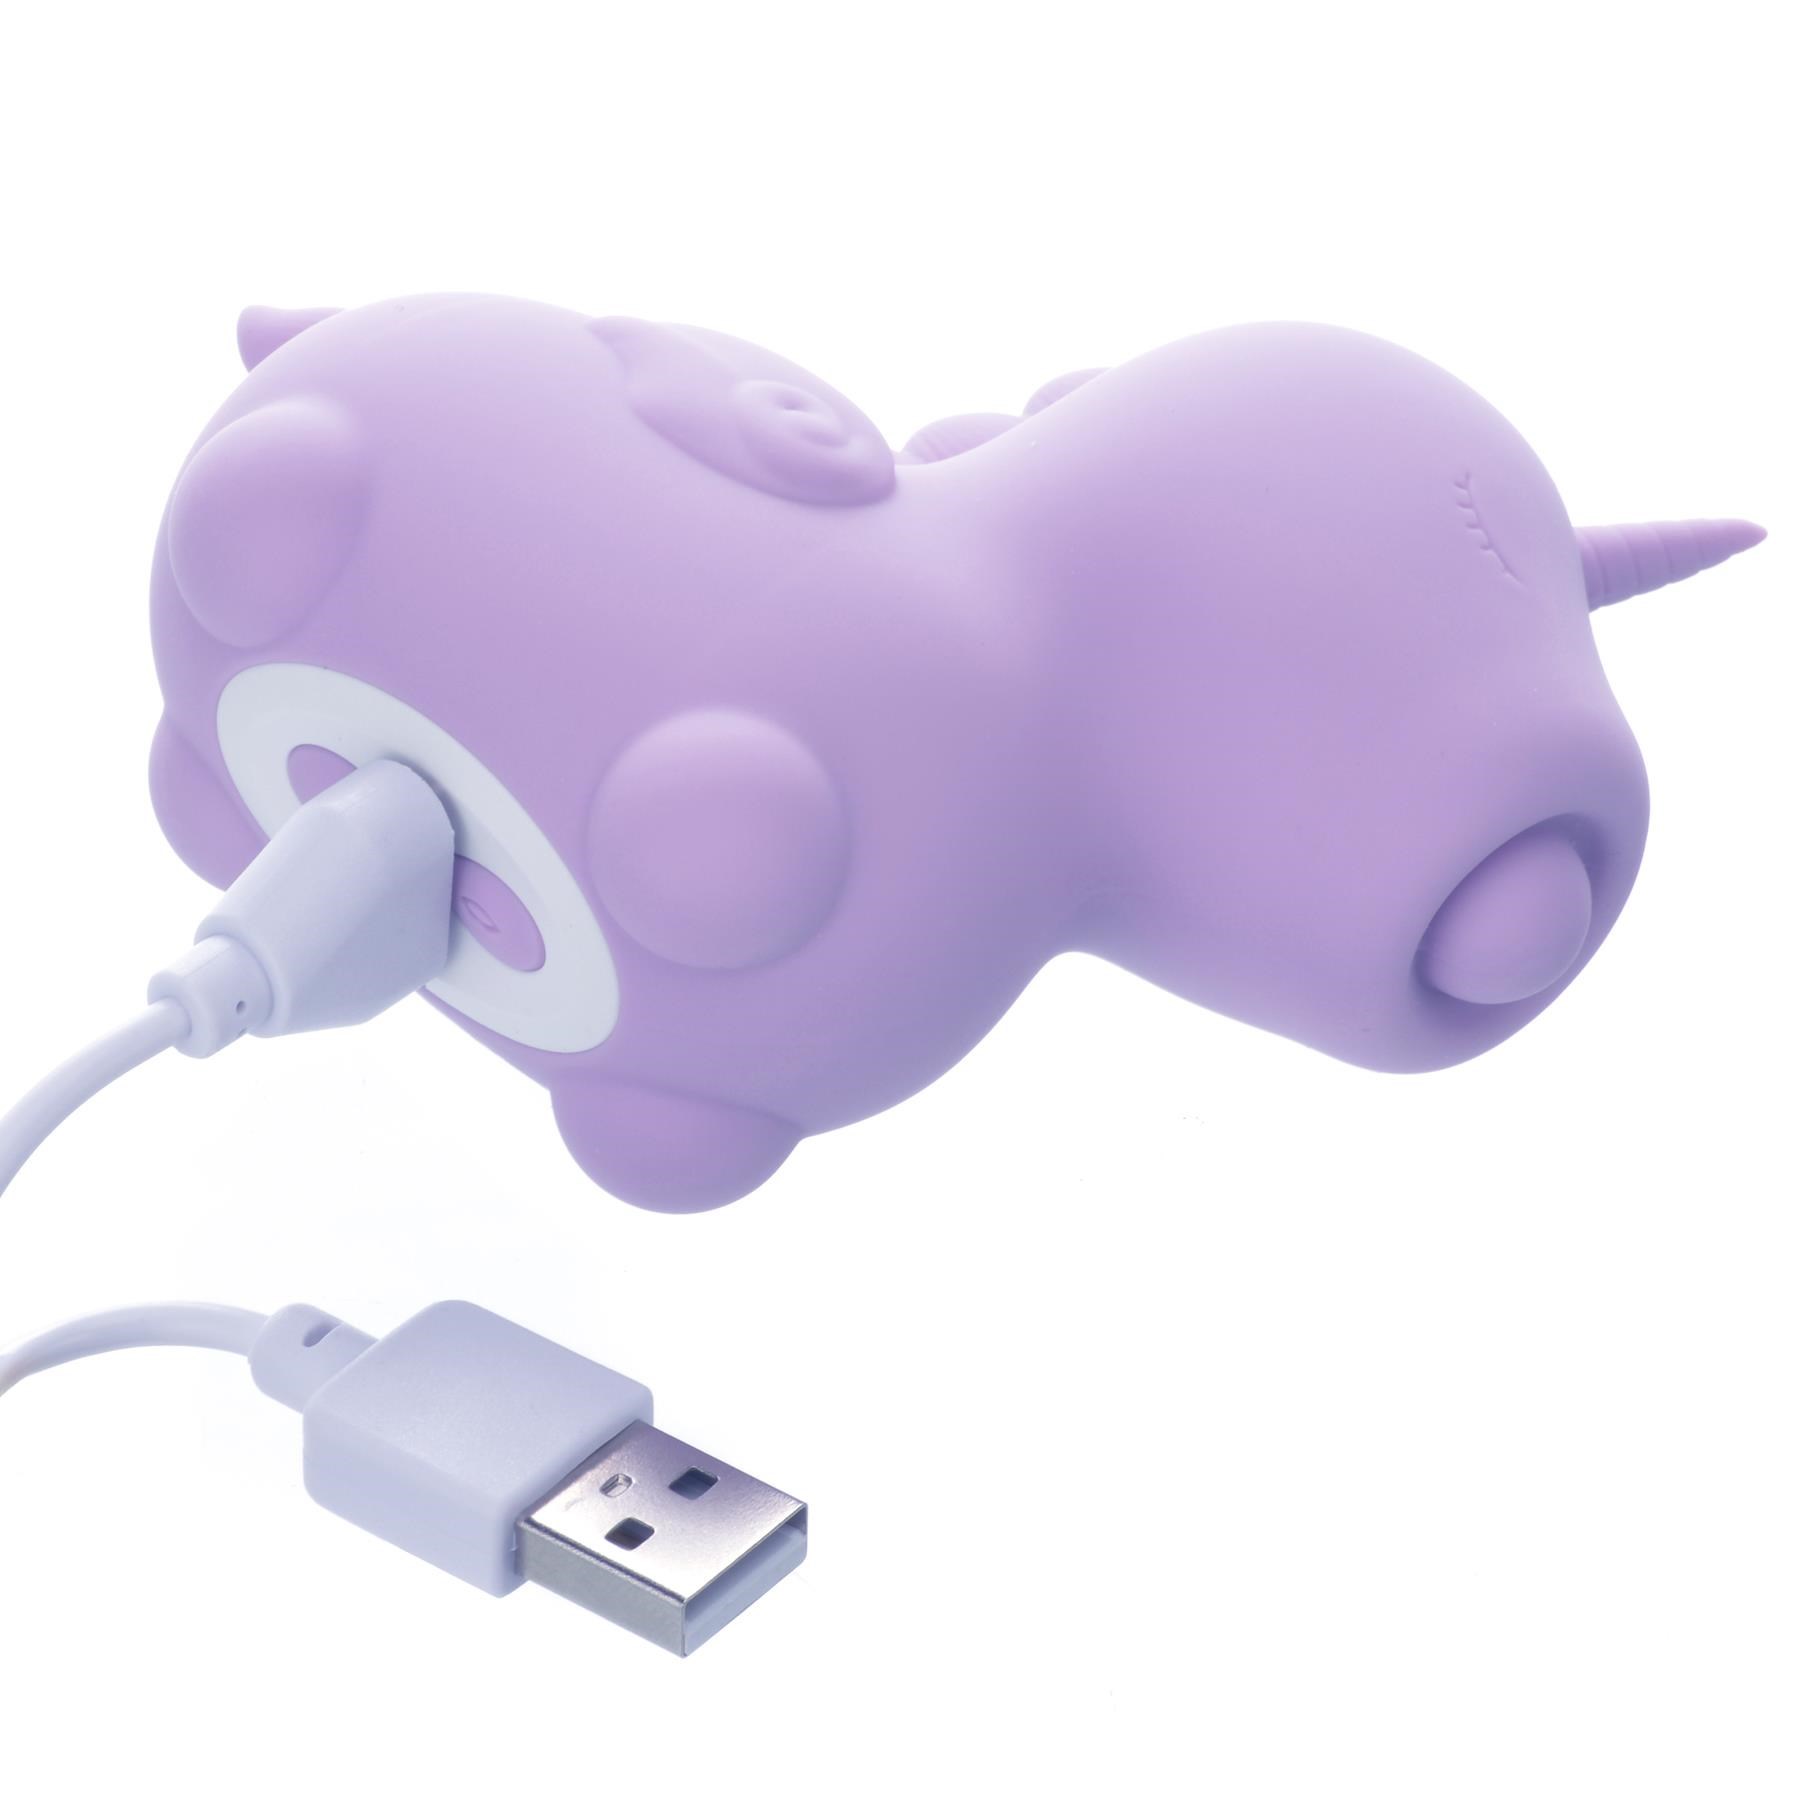 Unihorn Karma Lilac Mini Unicorn Vibrator- Showing Where Charging Cable is Placed